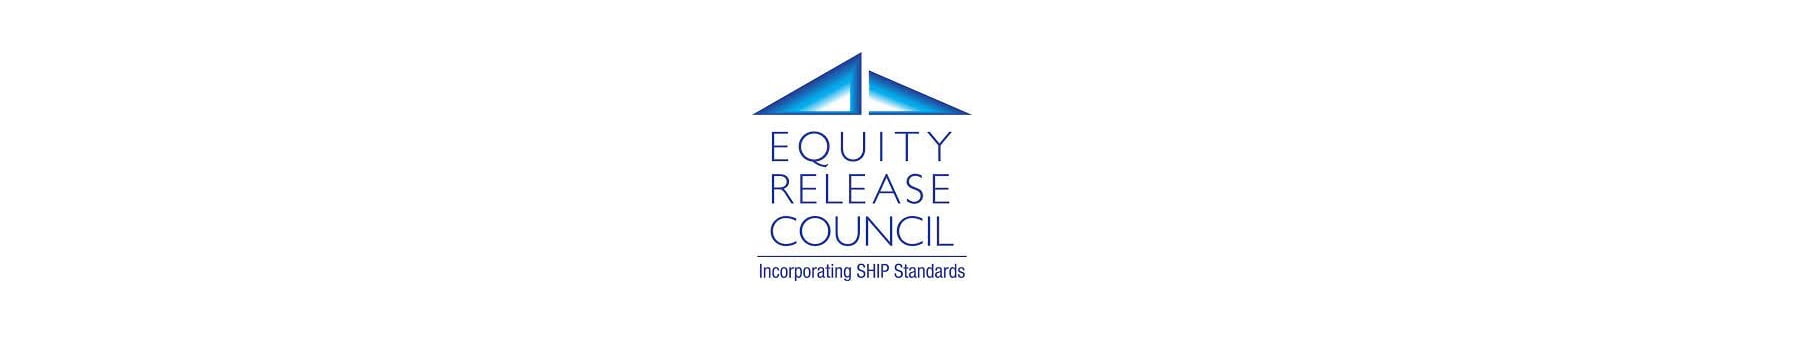 What’s the Equity Release Council & What Does it Do?